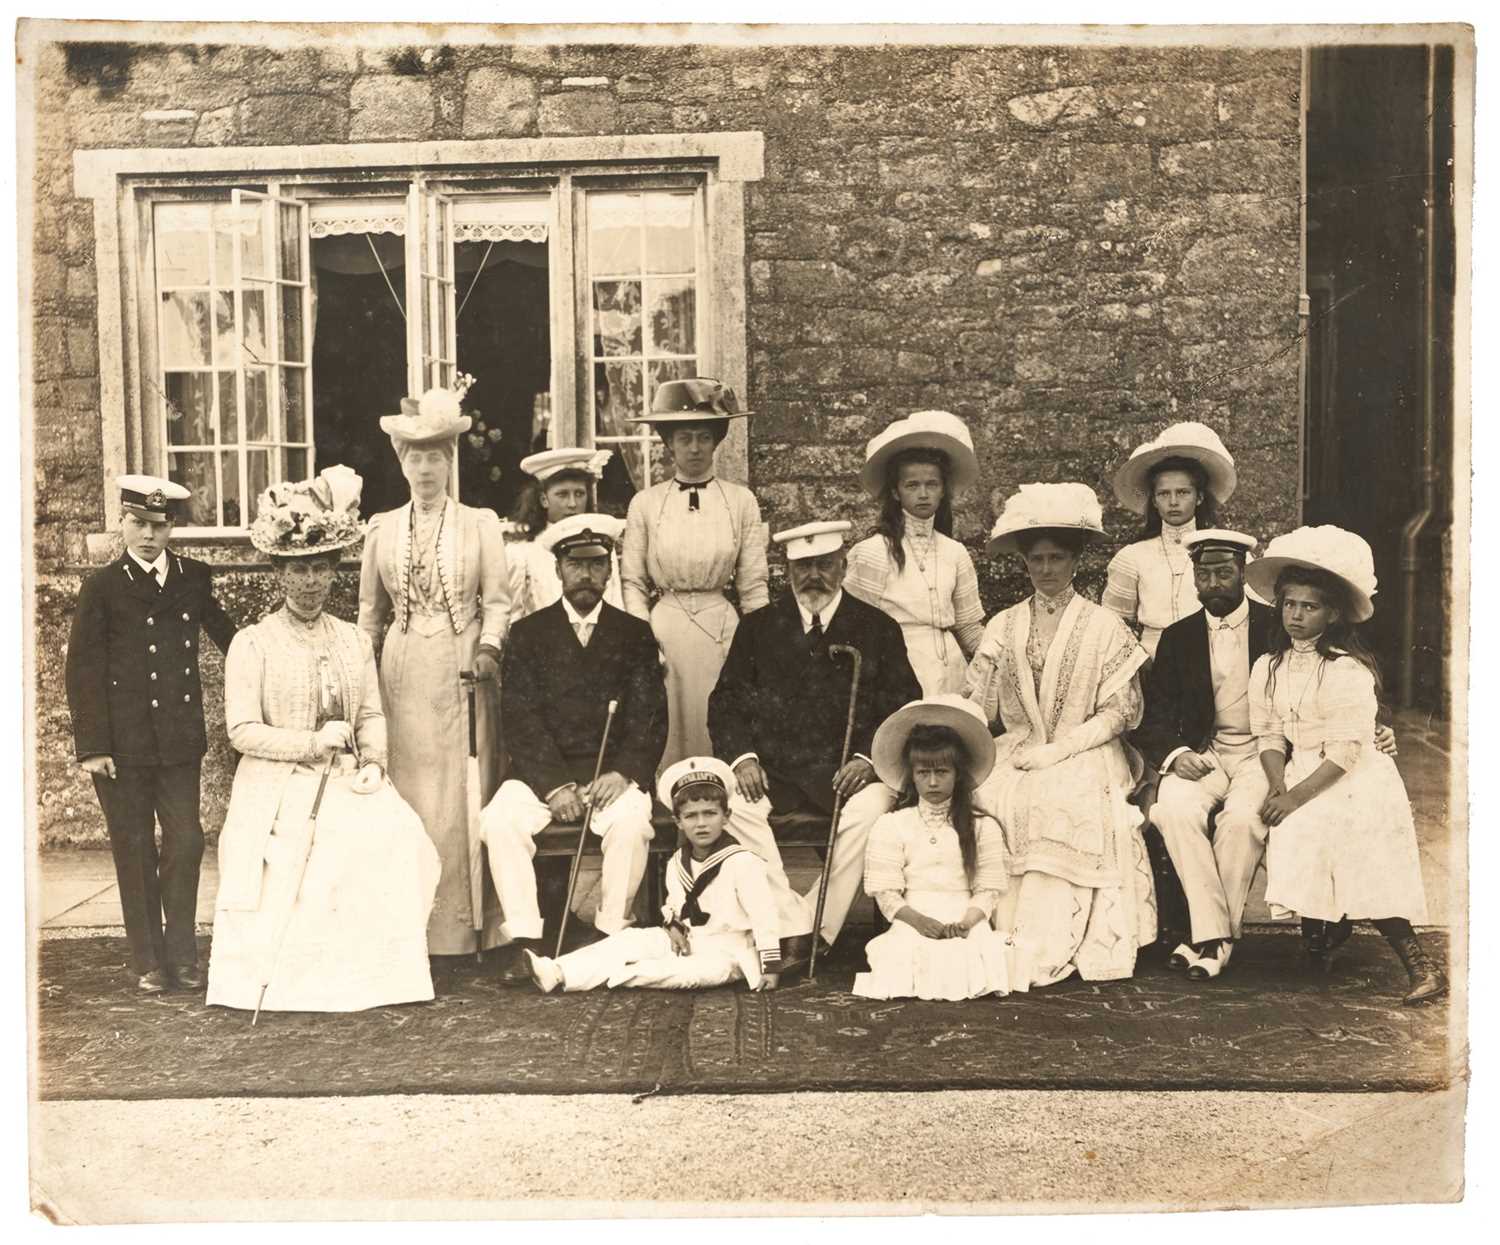 Lot 42 - H.I.H. Tsar Nicholas II of Russia and family and H.M. King Edward VII and family, fine group portrait taken on 4th August 1909 at Barton Manor Isle of Wight. This was the last occasion the Tsar cam...